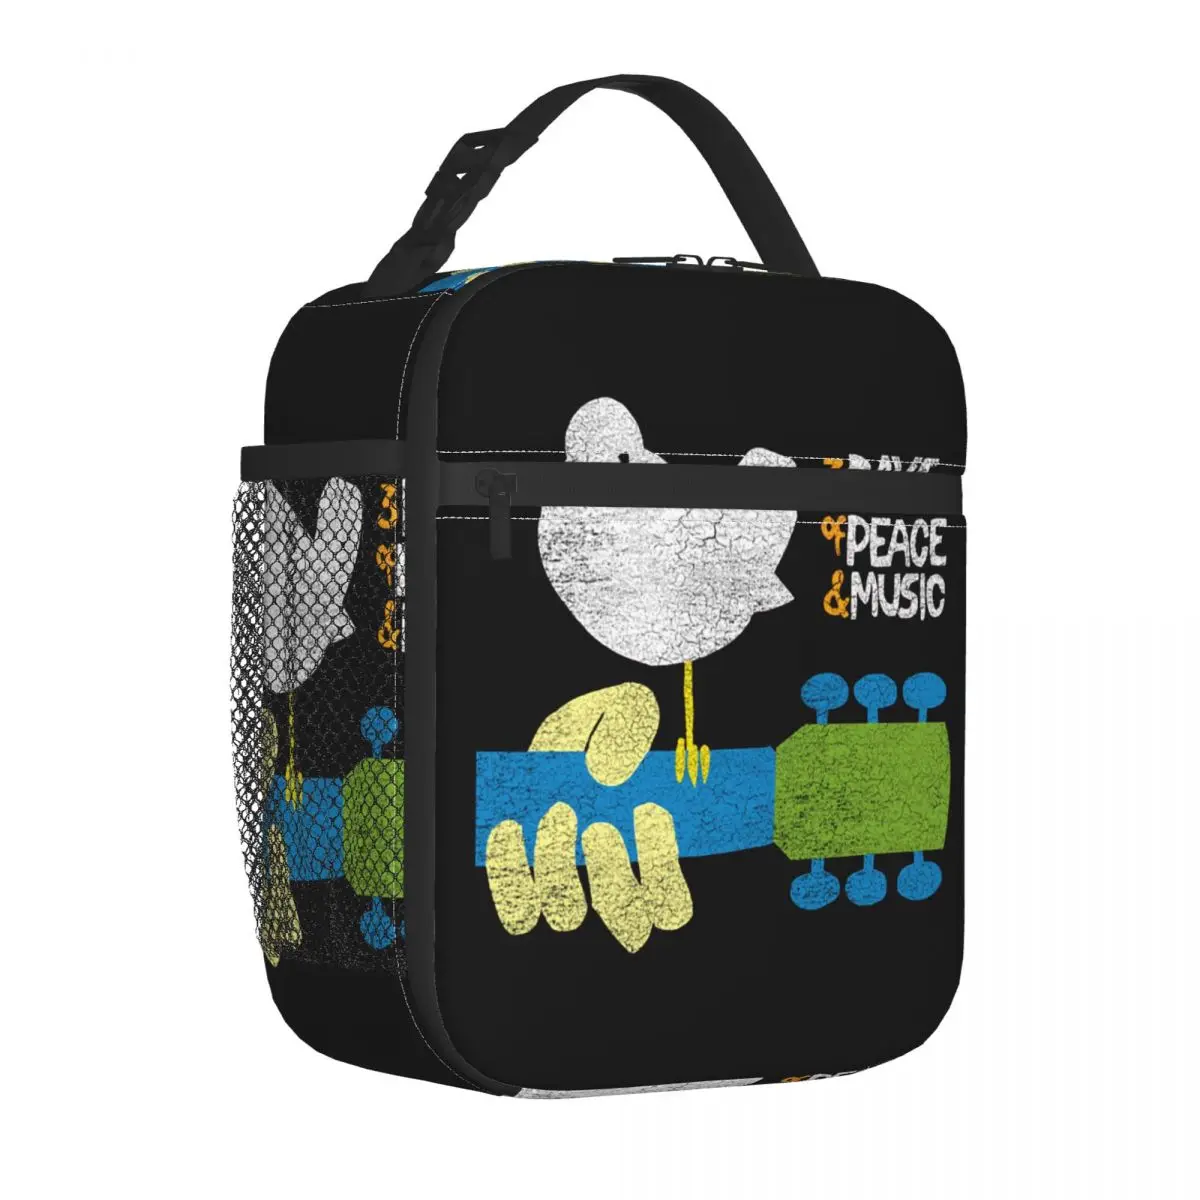 

Woodstock Perched Insulated Lunch Bags Thermal Bag Reusable Portable Tote Lunch Box Bento Pouch College Travel